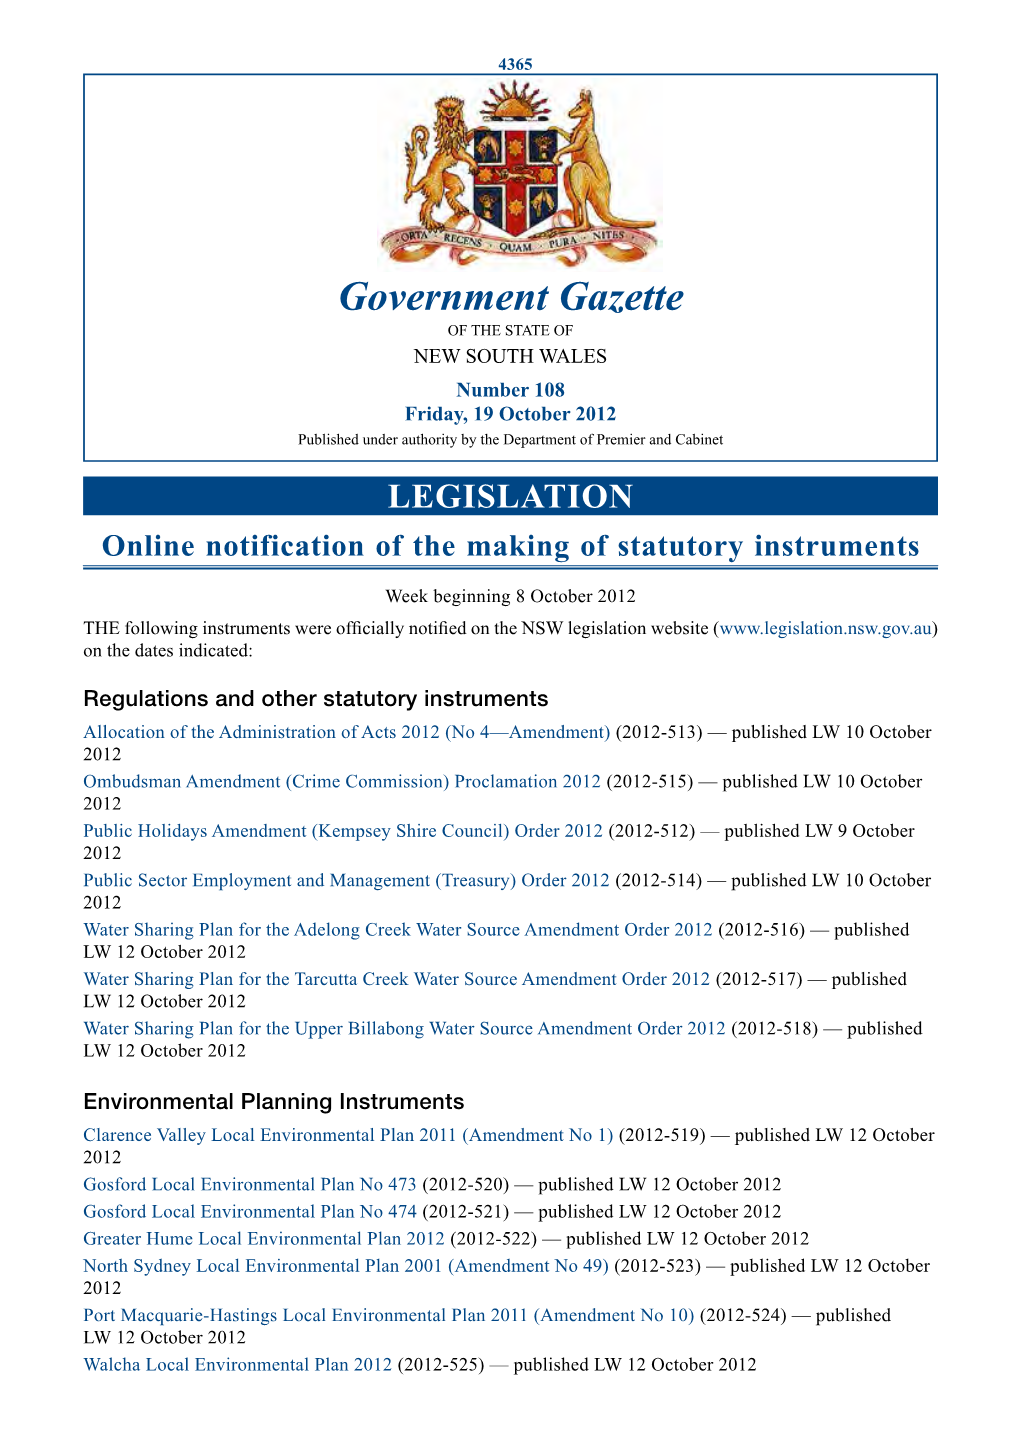 New South Wales Government Gazette No. 42 of 19 October